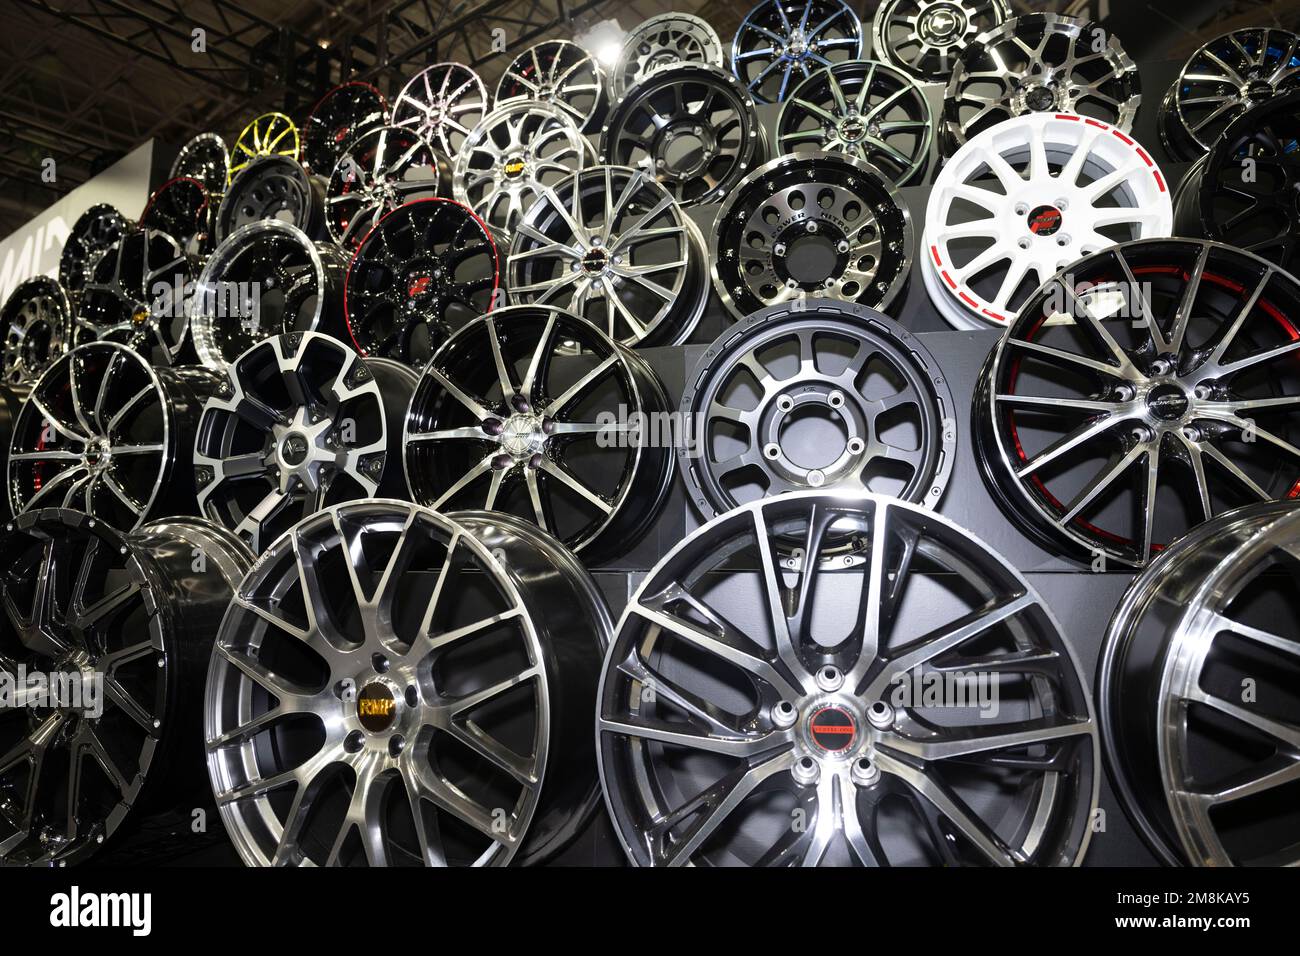 Chiba, Chiba Prefecture, Japan. 13th Jan, 2023. Wheel rims on display. Tokyo Auto Salon (æ±äº¬ã‚ªãƒ¼ãƒˆã‚µãƒ-ãƒ³) is considered one of the most prestigious aftermarket car shows in the world, attracting car enthusiasts, manufacturers, and media from all over the globe. The show features a wide range of customized and high-performance cars, including sports cars, luxury cars, and even trucks and buses. Visitors can also expect to see car-related products and technology such as wheels, tires, audio systems, and car electronics. Some of the most notable manufacturers that participate in the Stock Photo